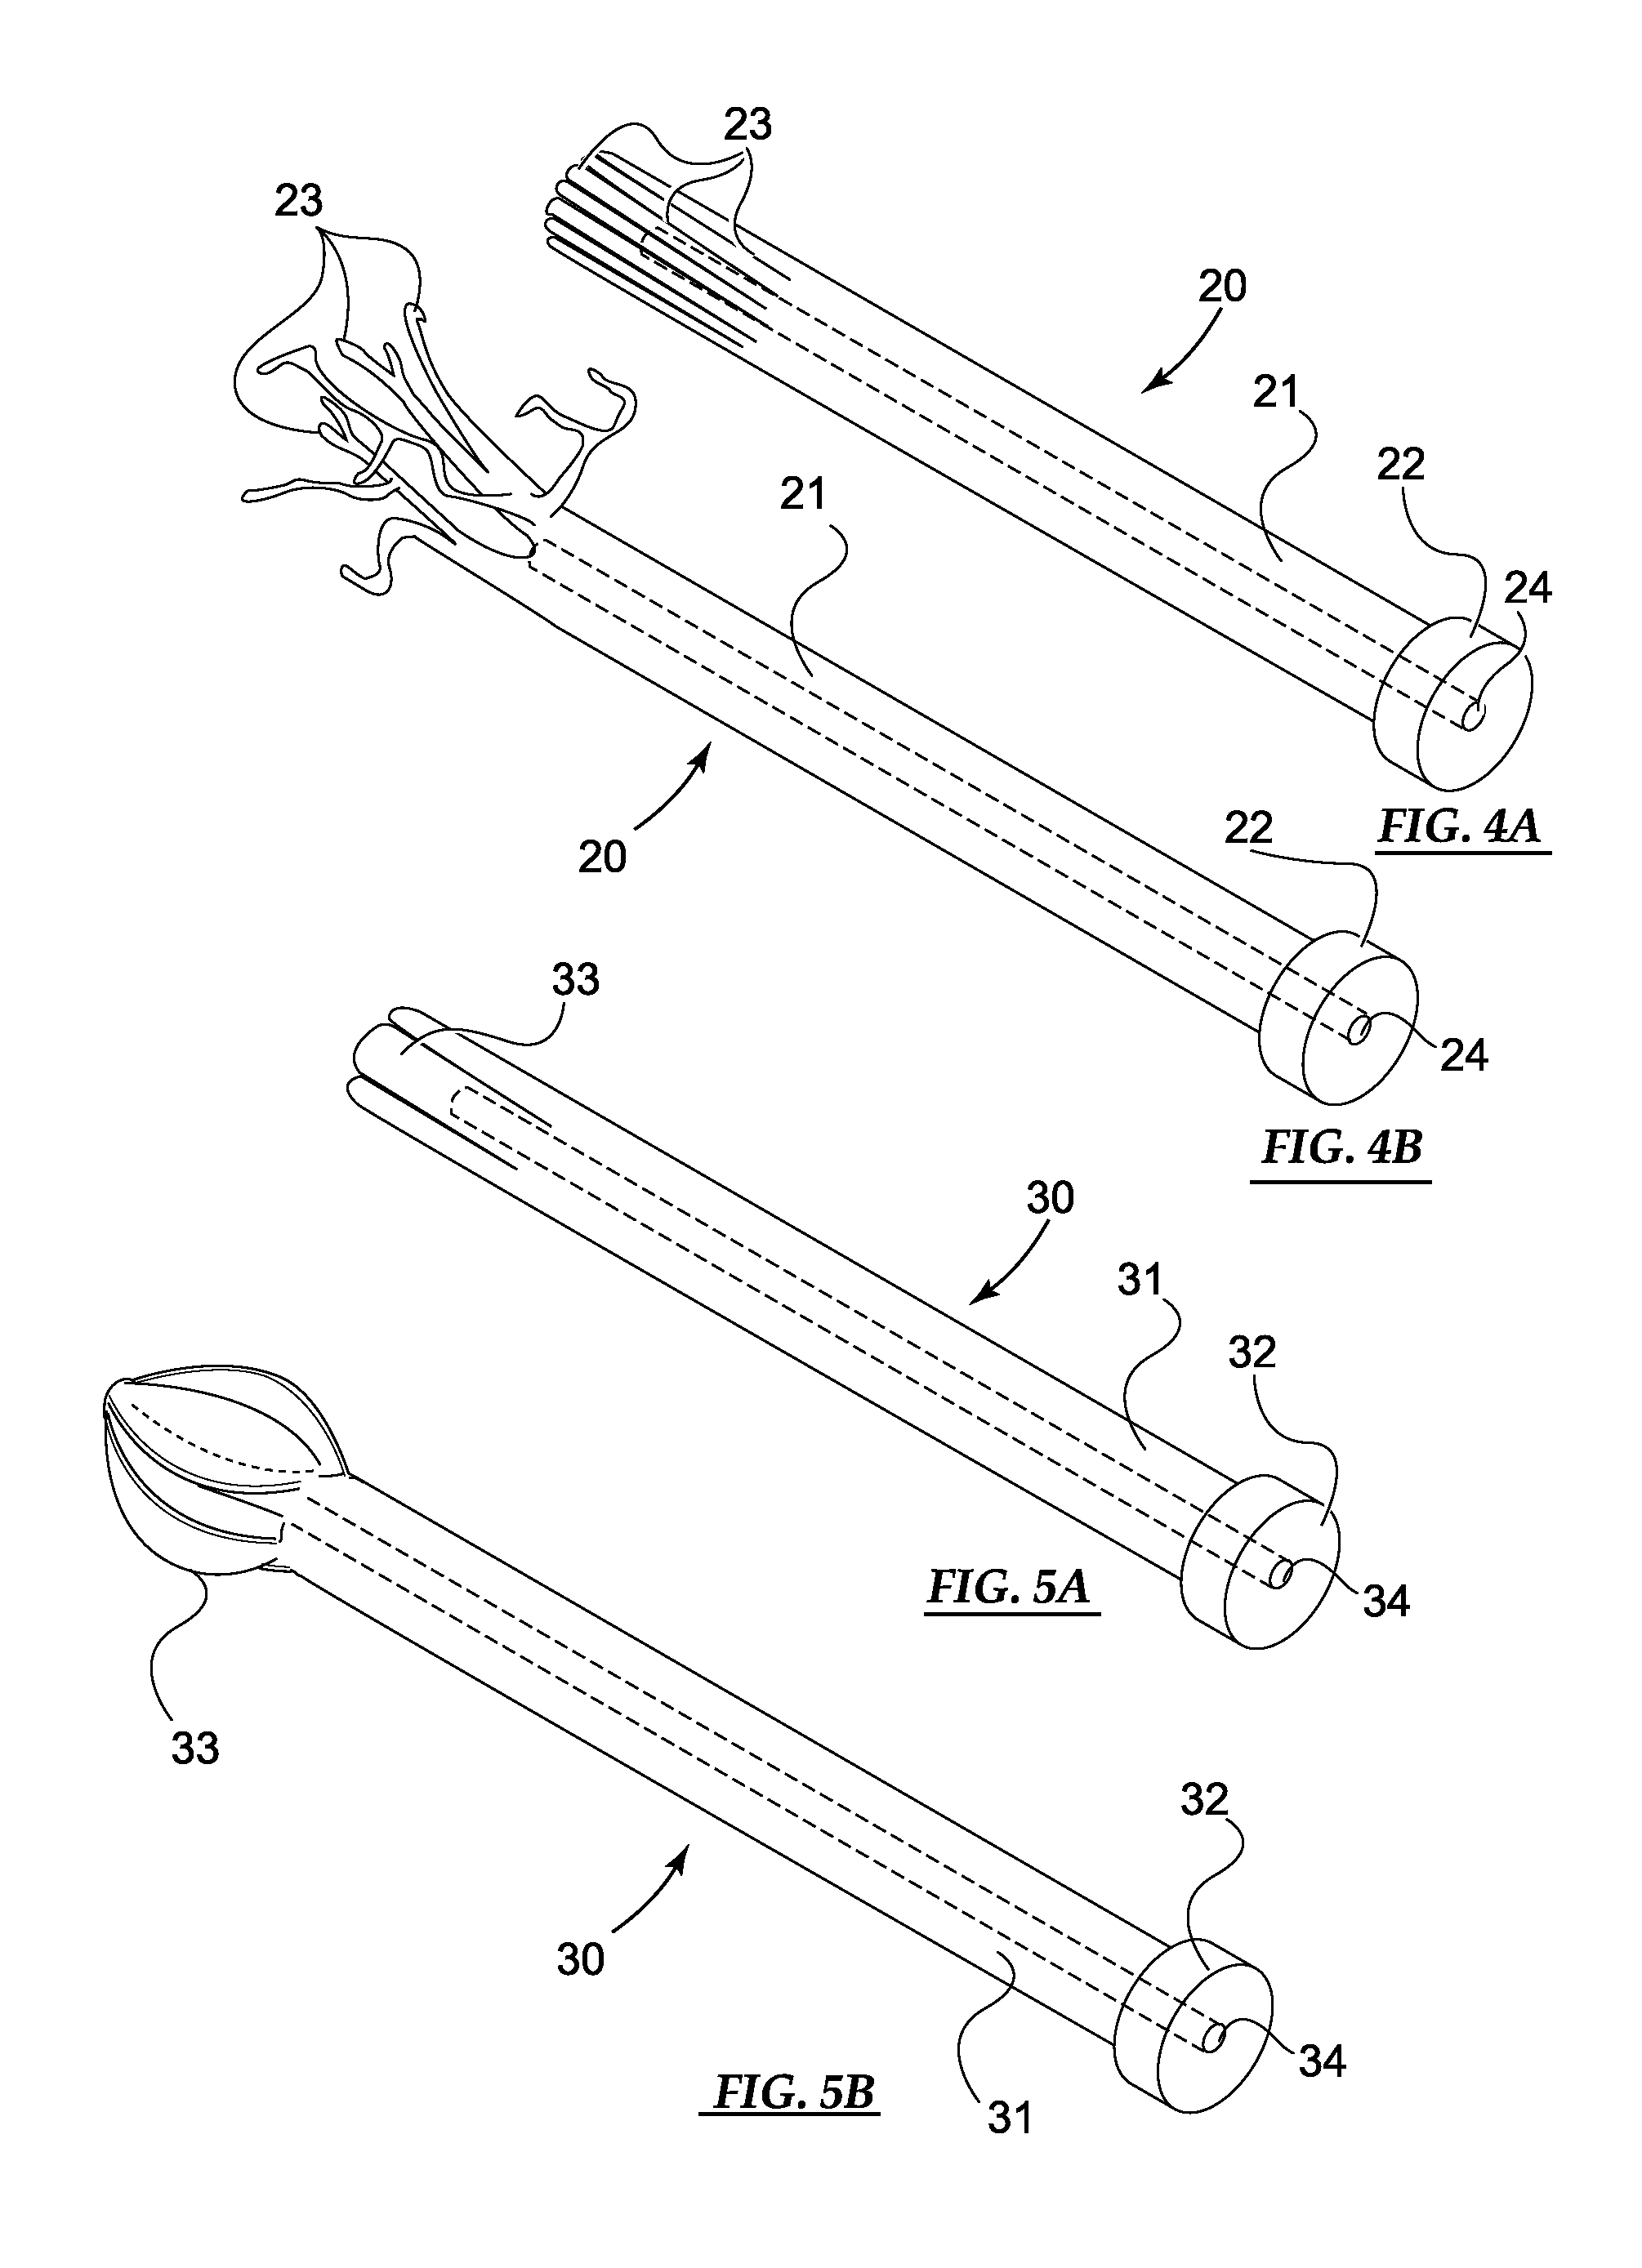 Device and method for orthopedic fracture fixation